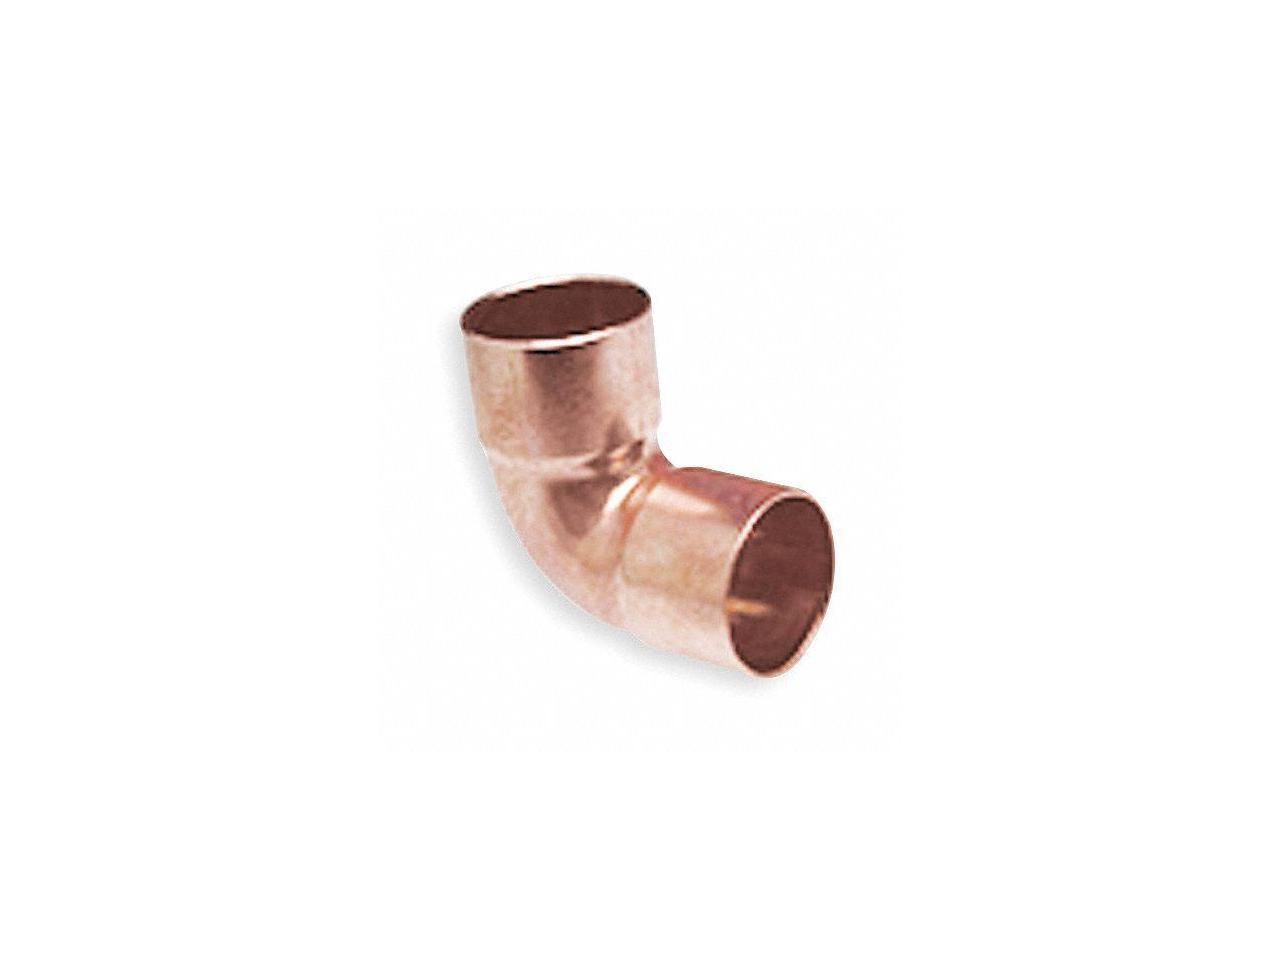 2" 90 Degrees NIBCO Elbow C x C COPPER PIPE FITTING U607 2 FREE SHIPPING 